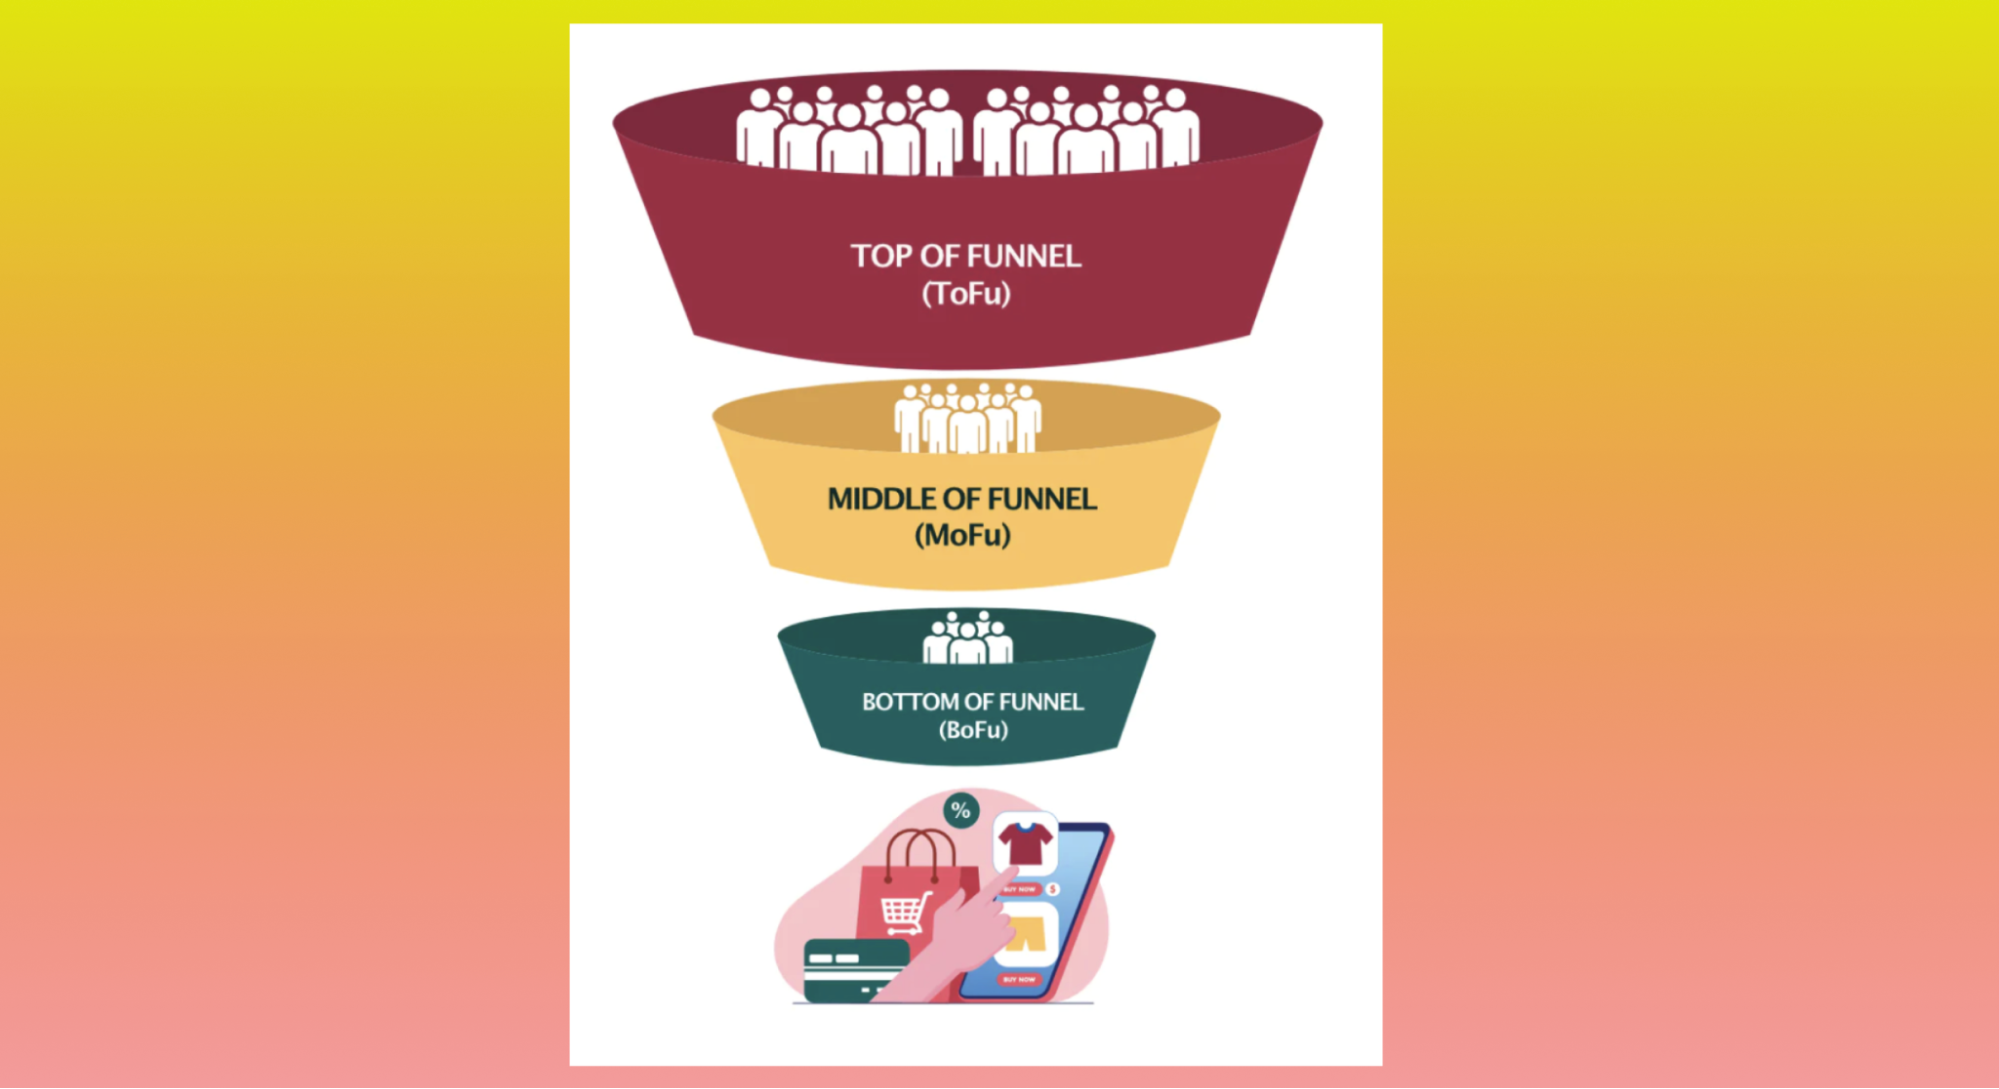 Image of an ecommerce sales funnel